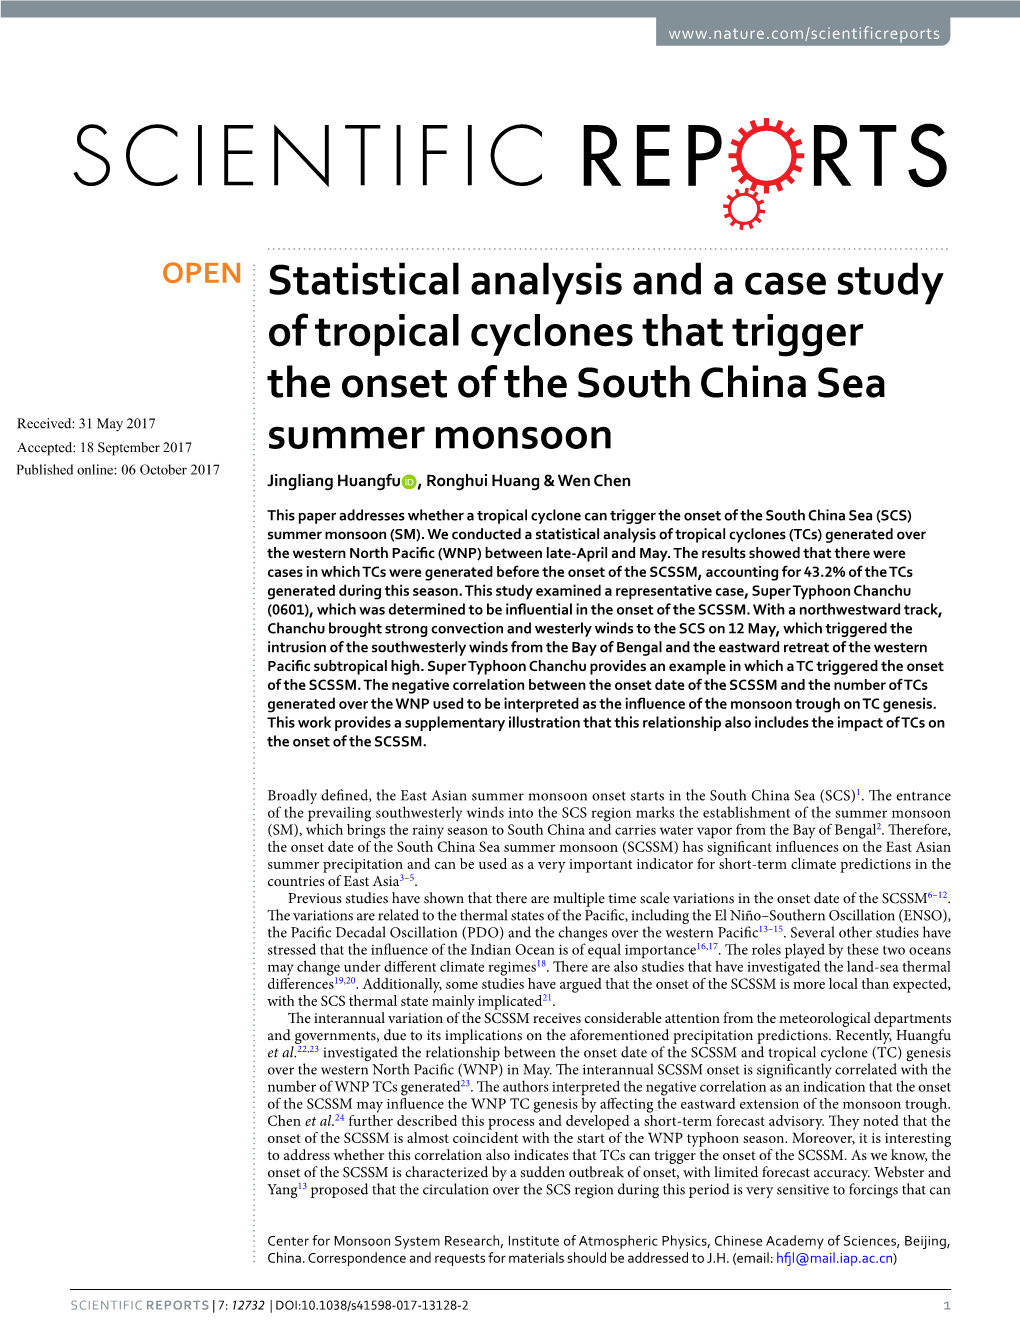 Statistical Analysis and a Case Study of Tropical Cyclones That Trigger the Onset of the South China Sea Summer Monsoon